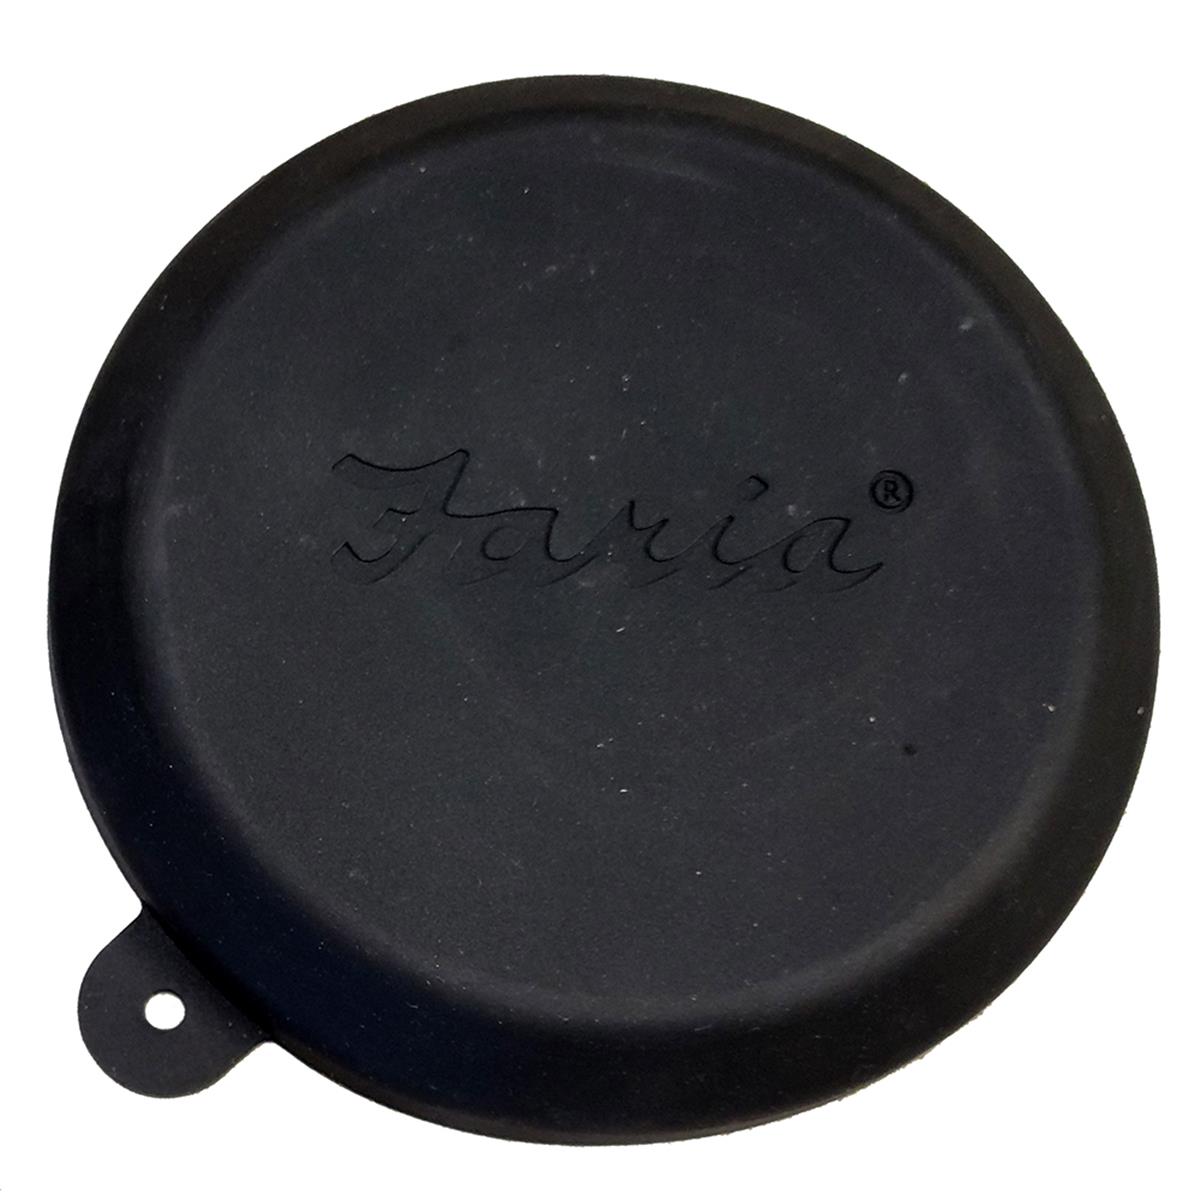 Picture of Faria Beede Instruments F91406 5 in. Gauge Weather Cover, Black